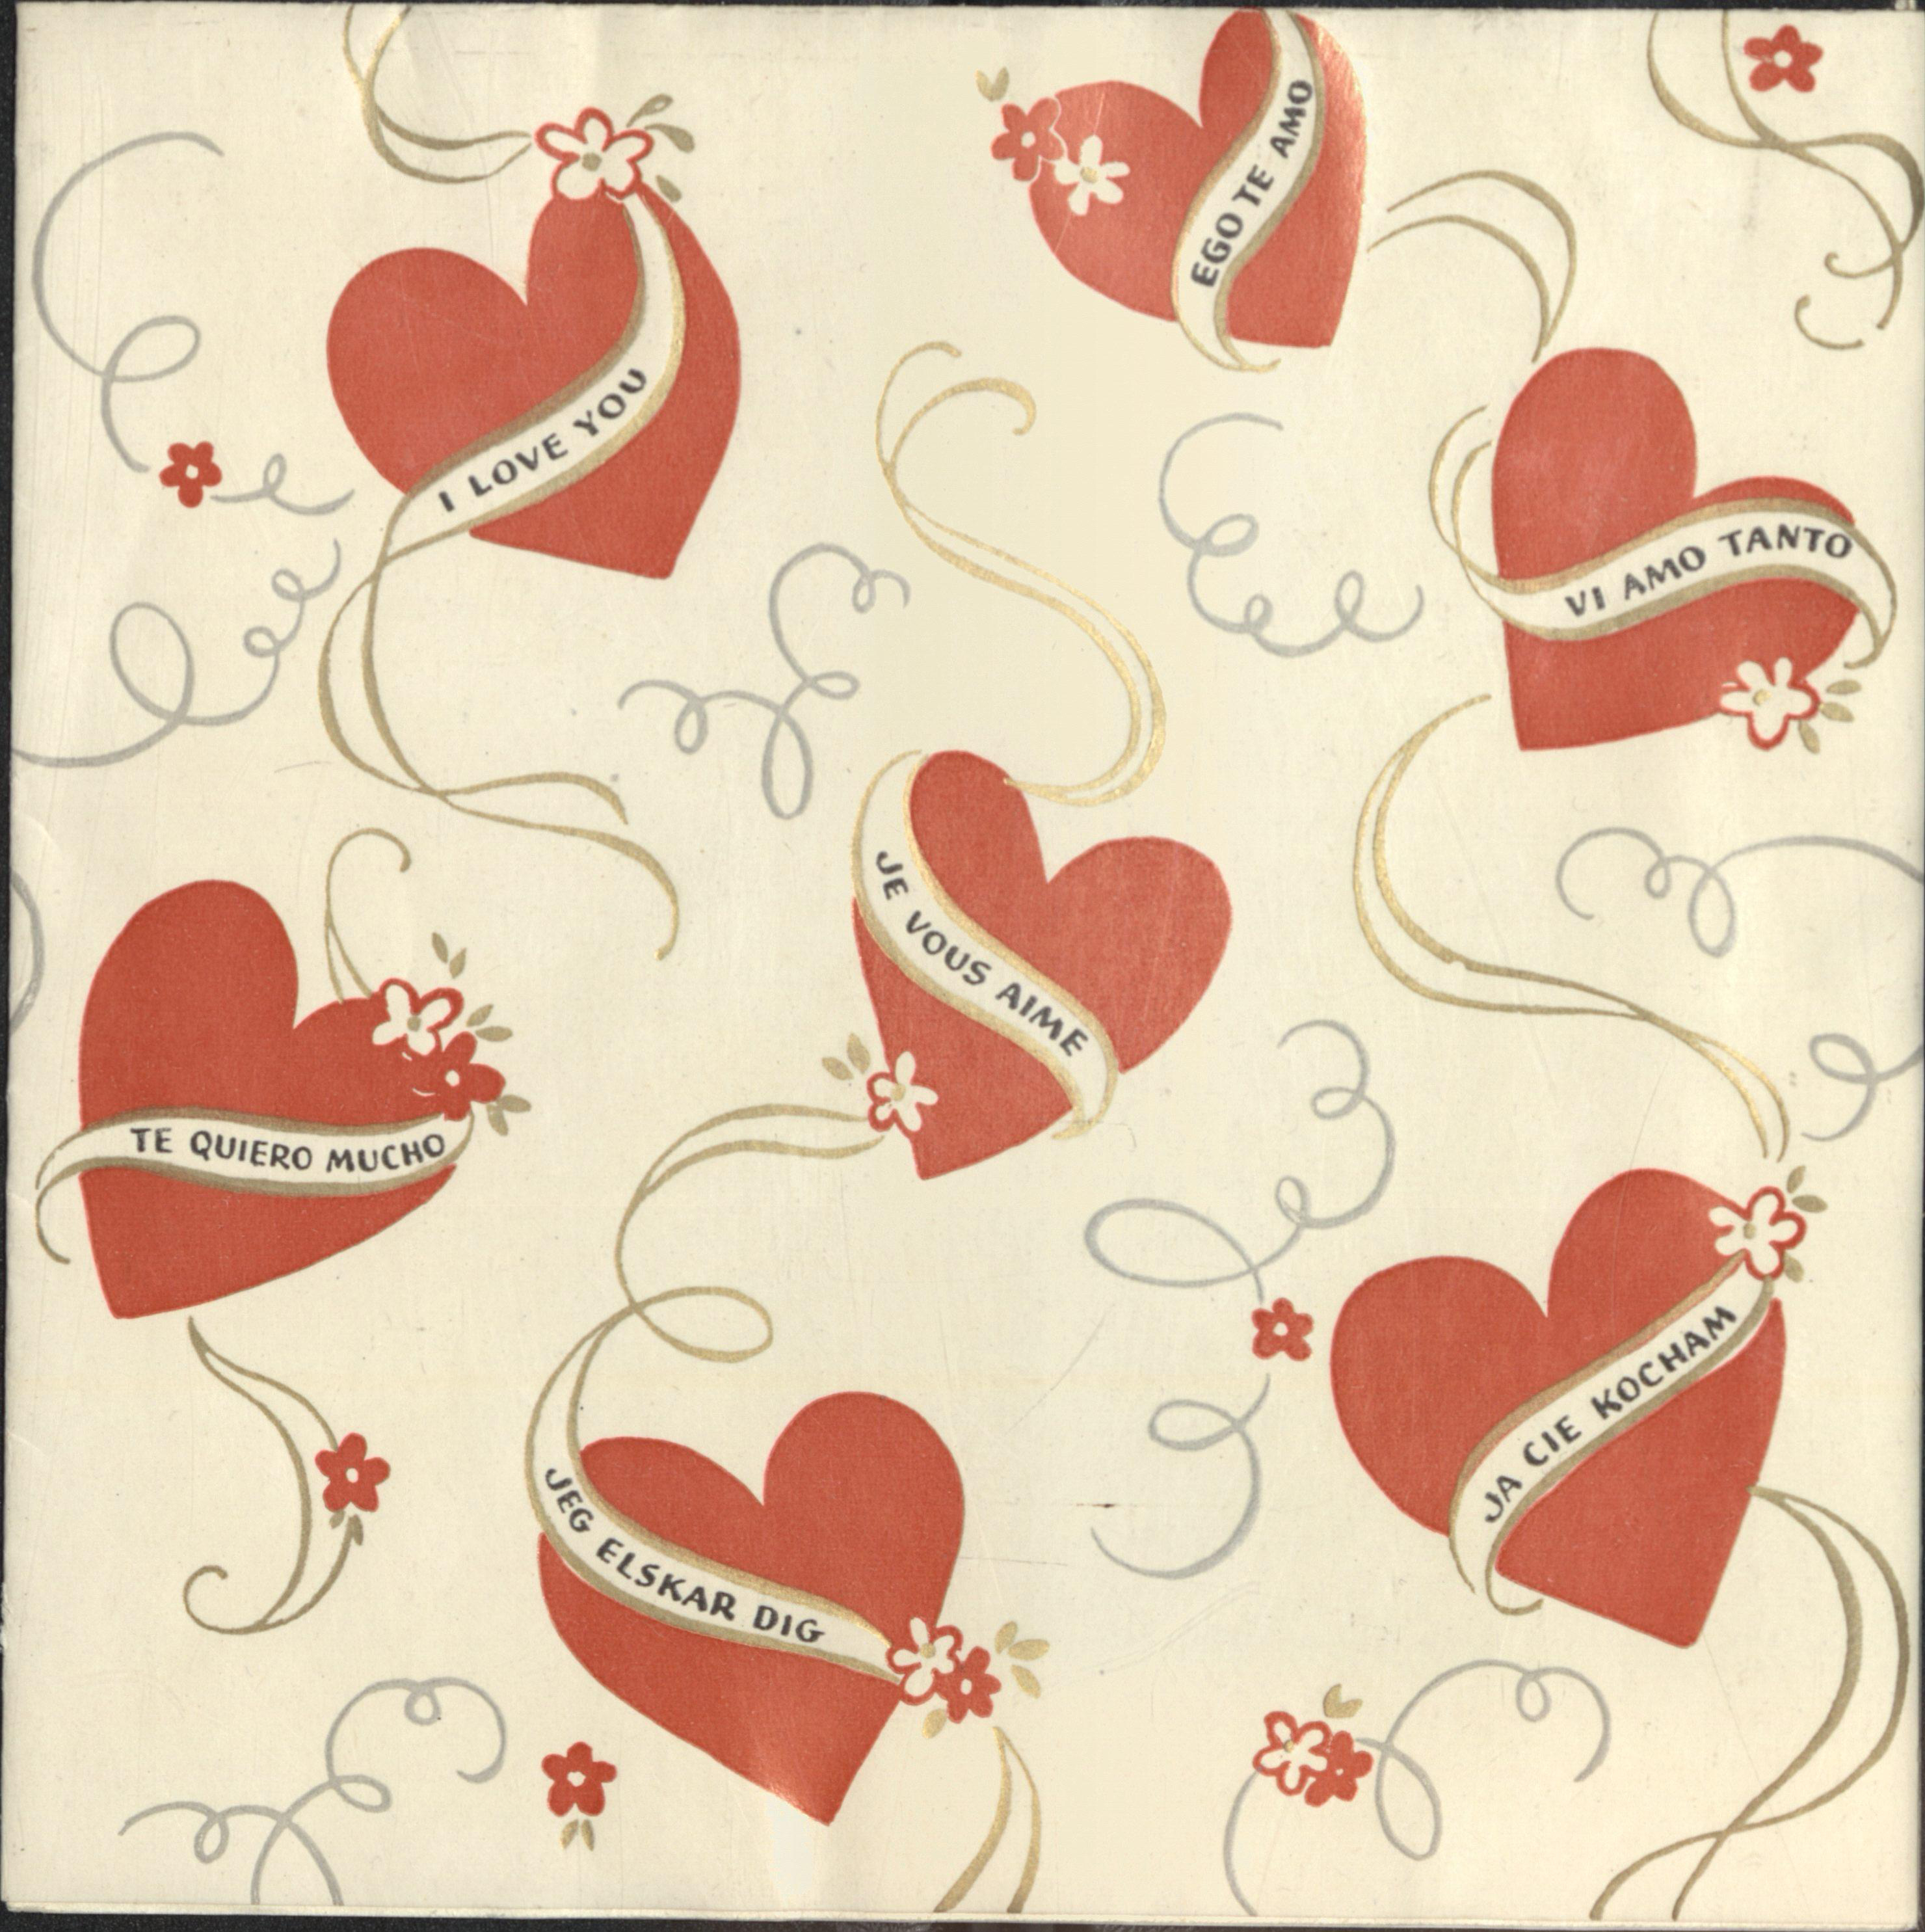 Free Victorian Valentine Cards: Hearts and Flowers